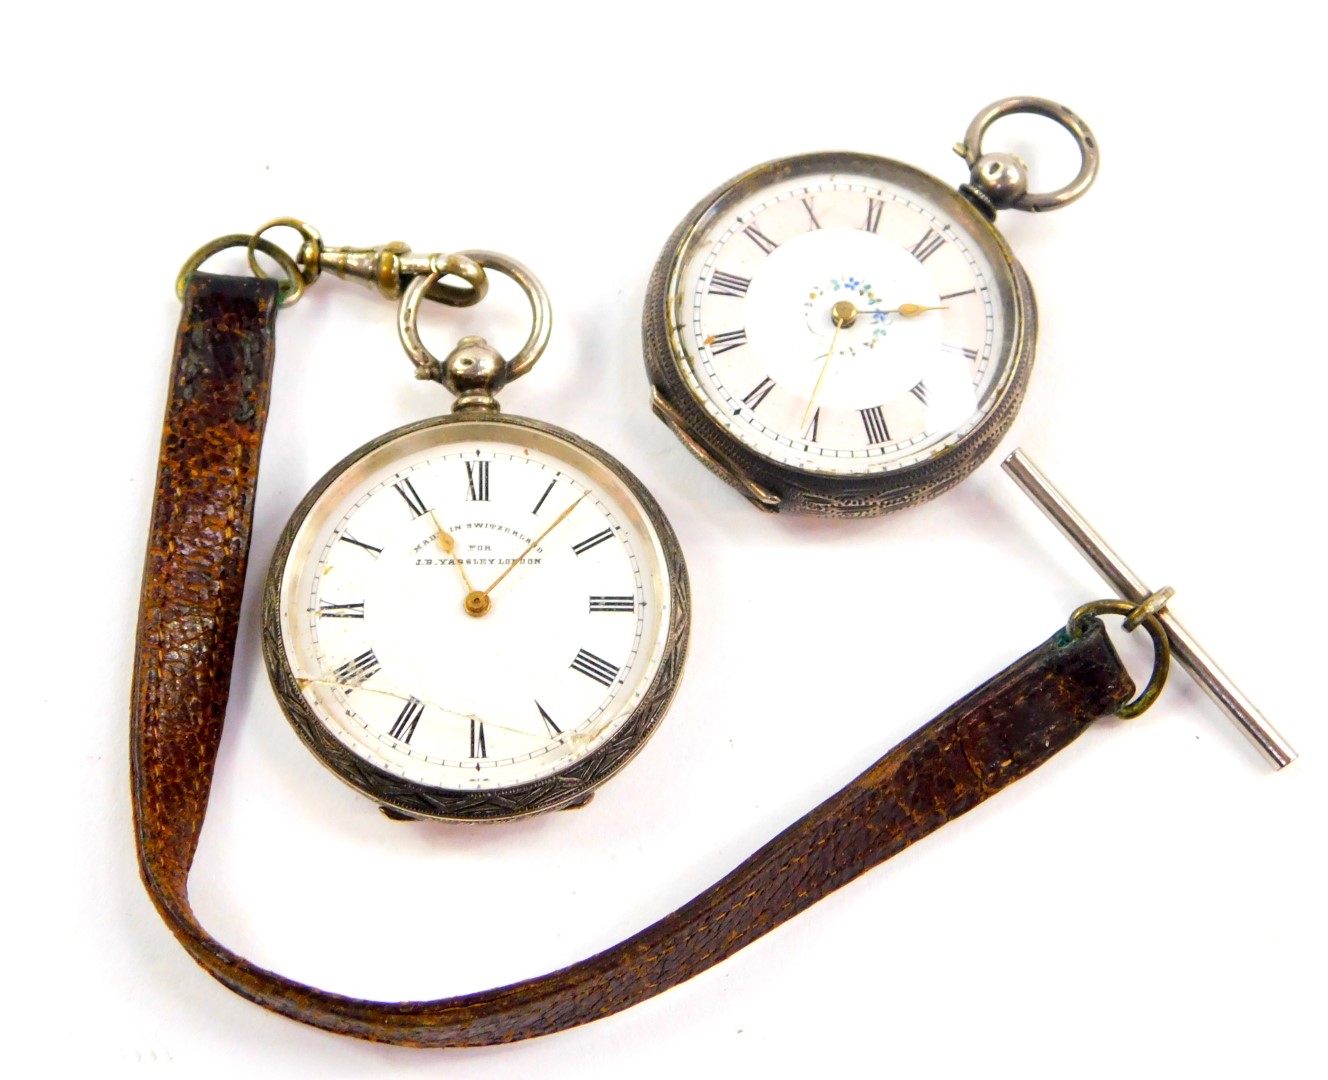 A Swiss silver cased gentleman's pocket watch, for J B Yabsley, 72 Ludgate Hill, London., open faced